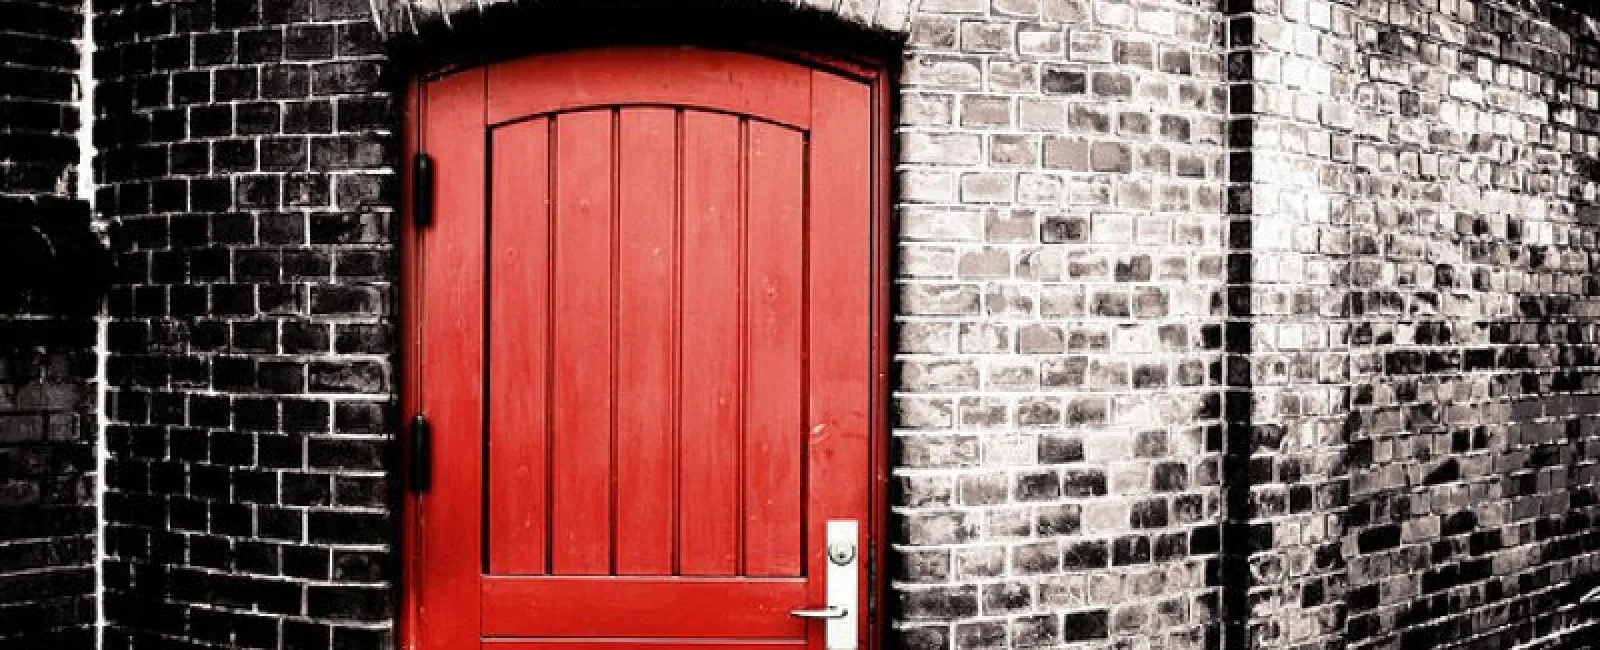 Find Door Styles that Match Your Personality